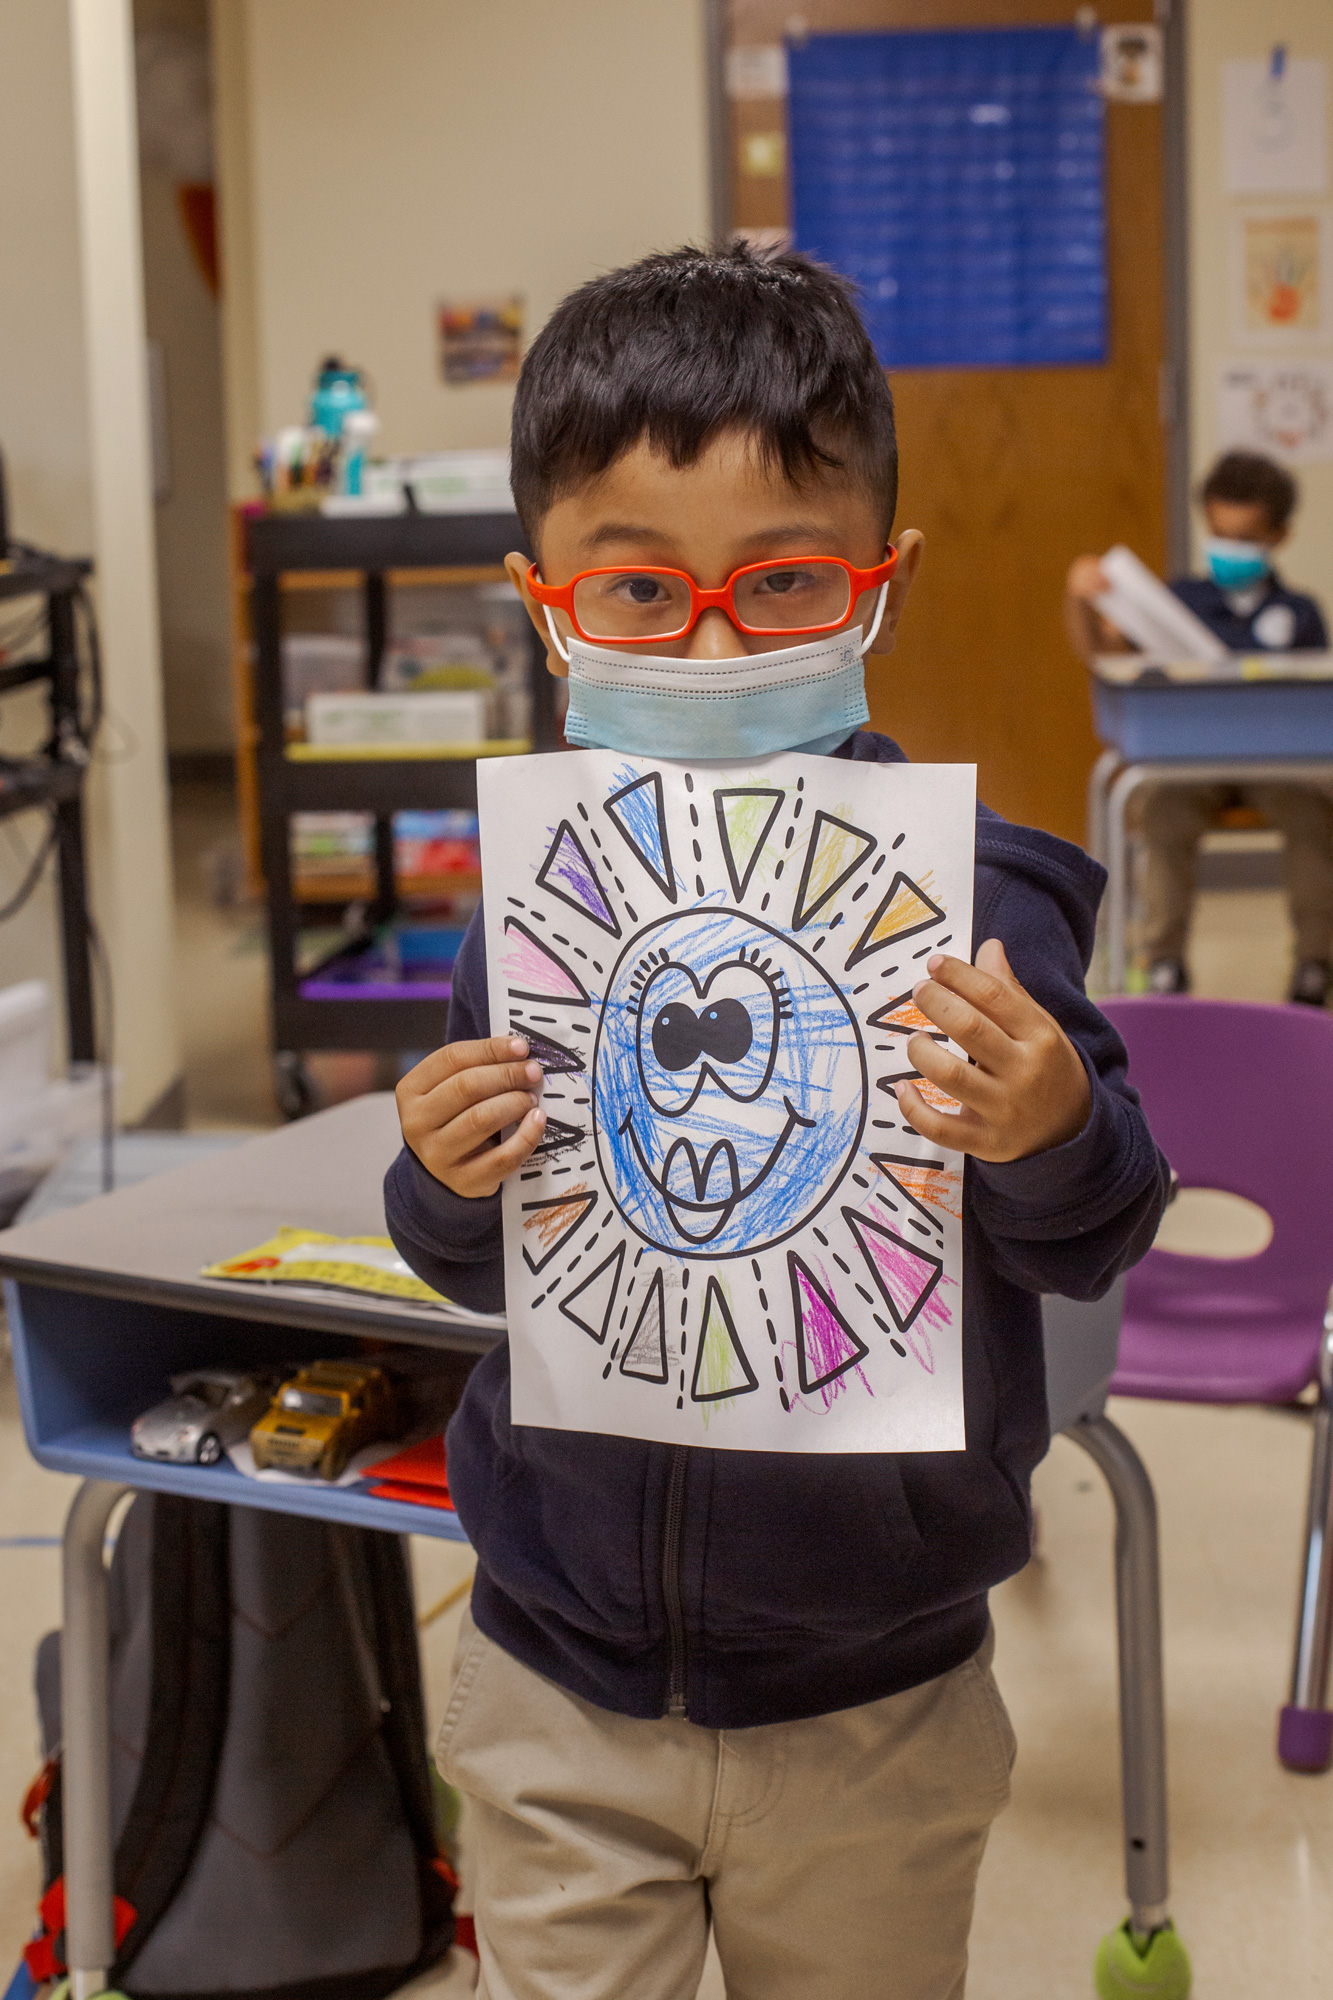 little boy with glasses and a mask on in a classroom holding up a coloring page